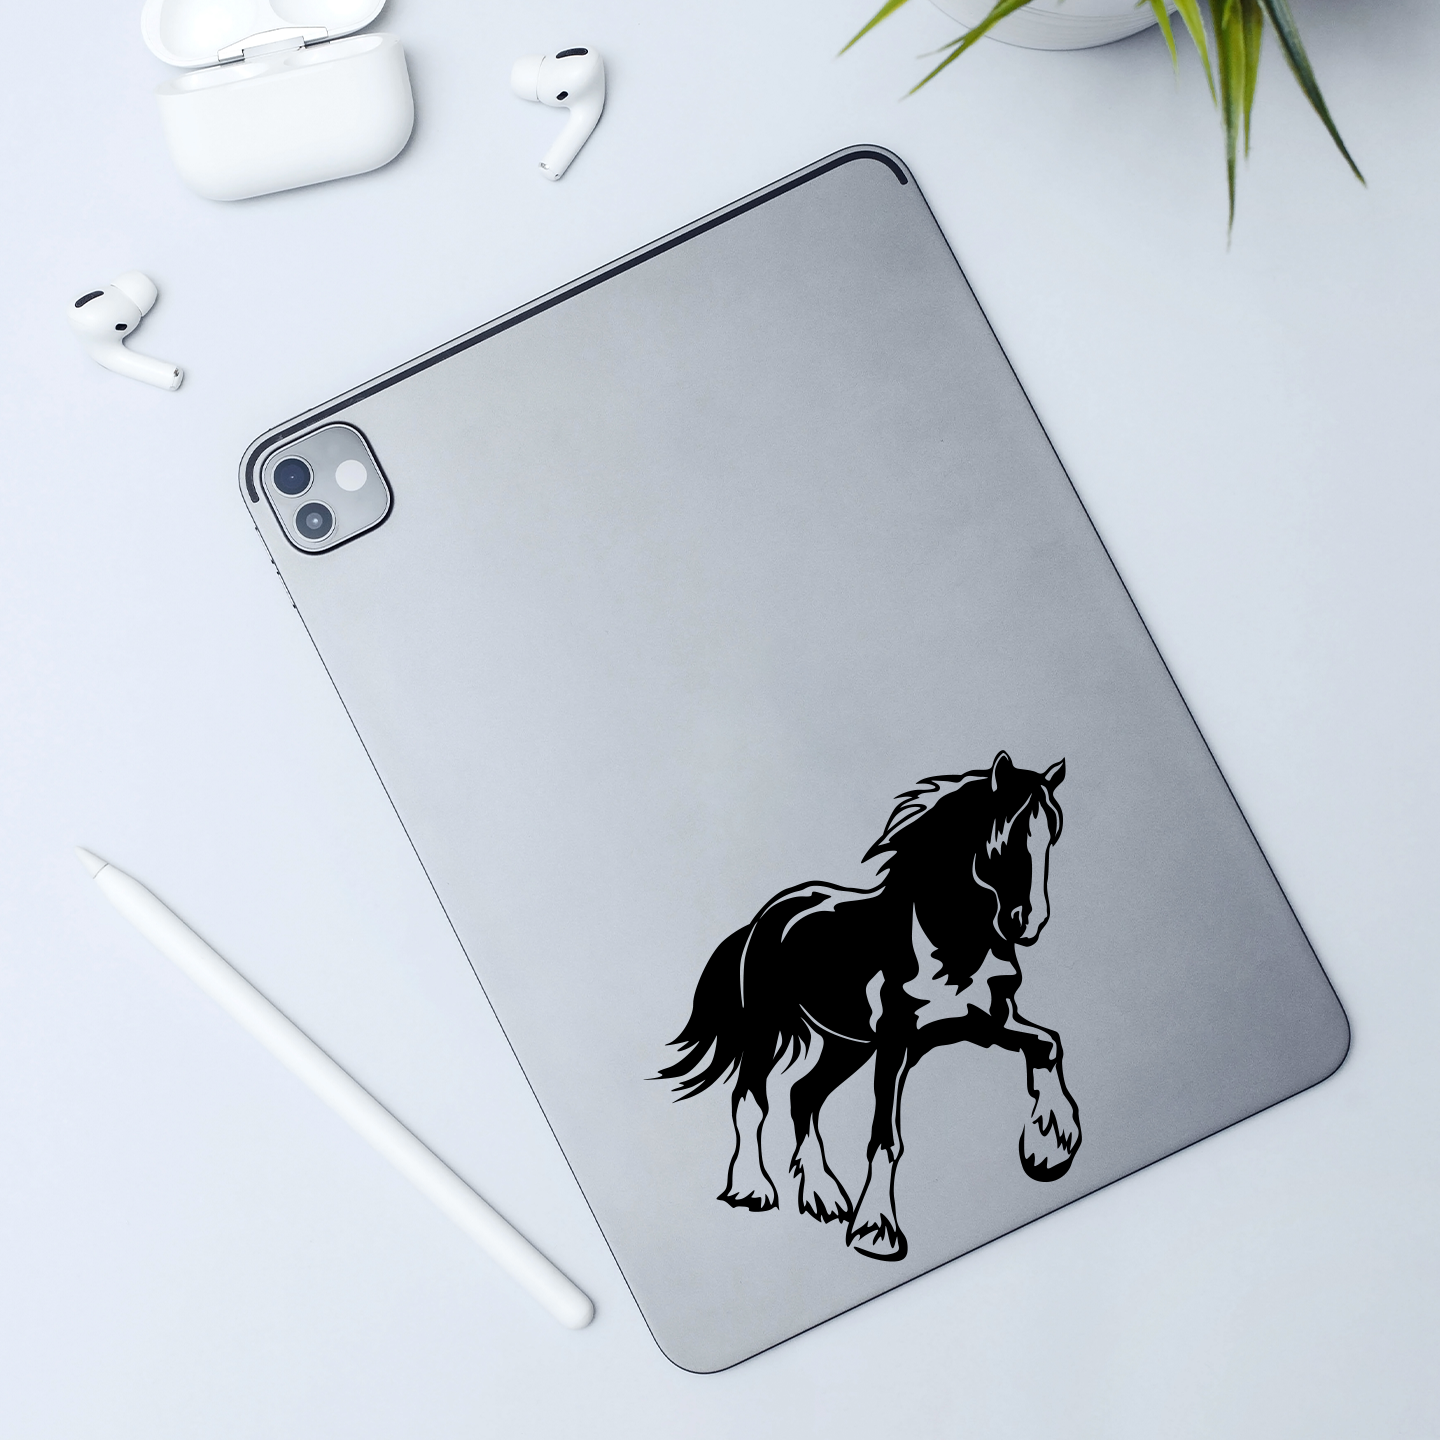 Draught Horse Sticker